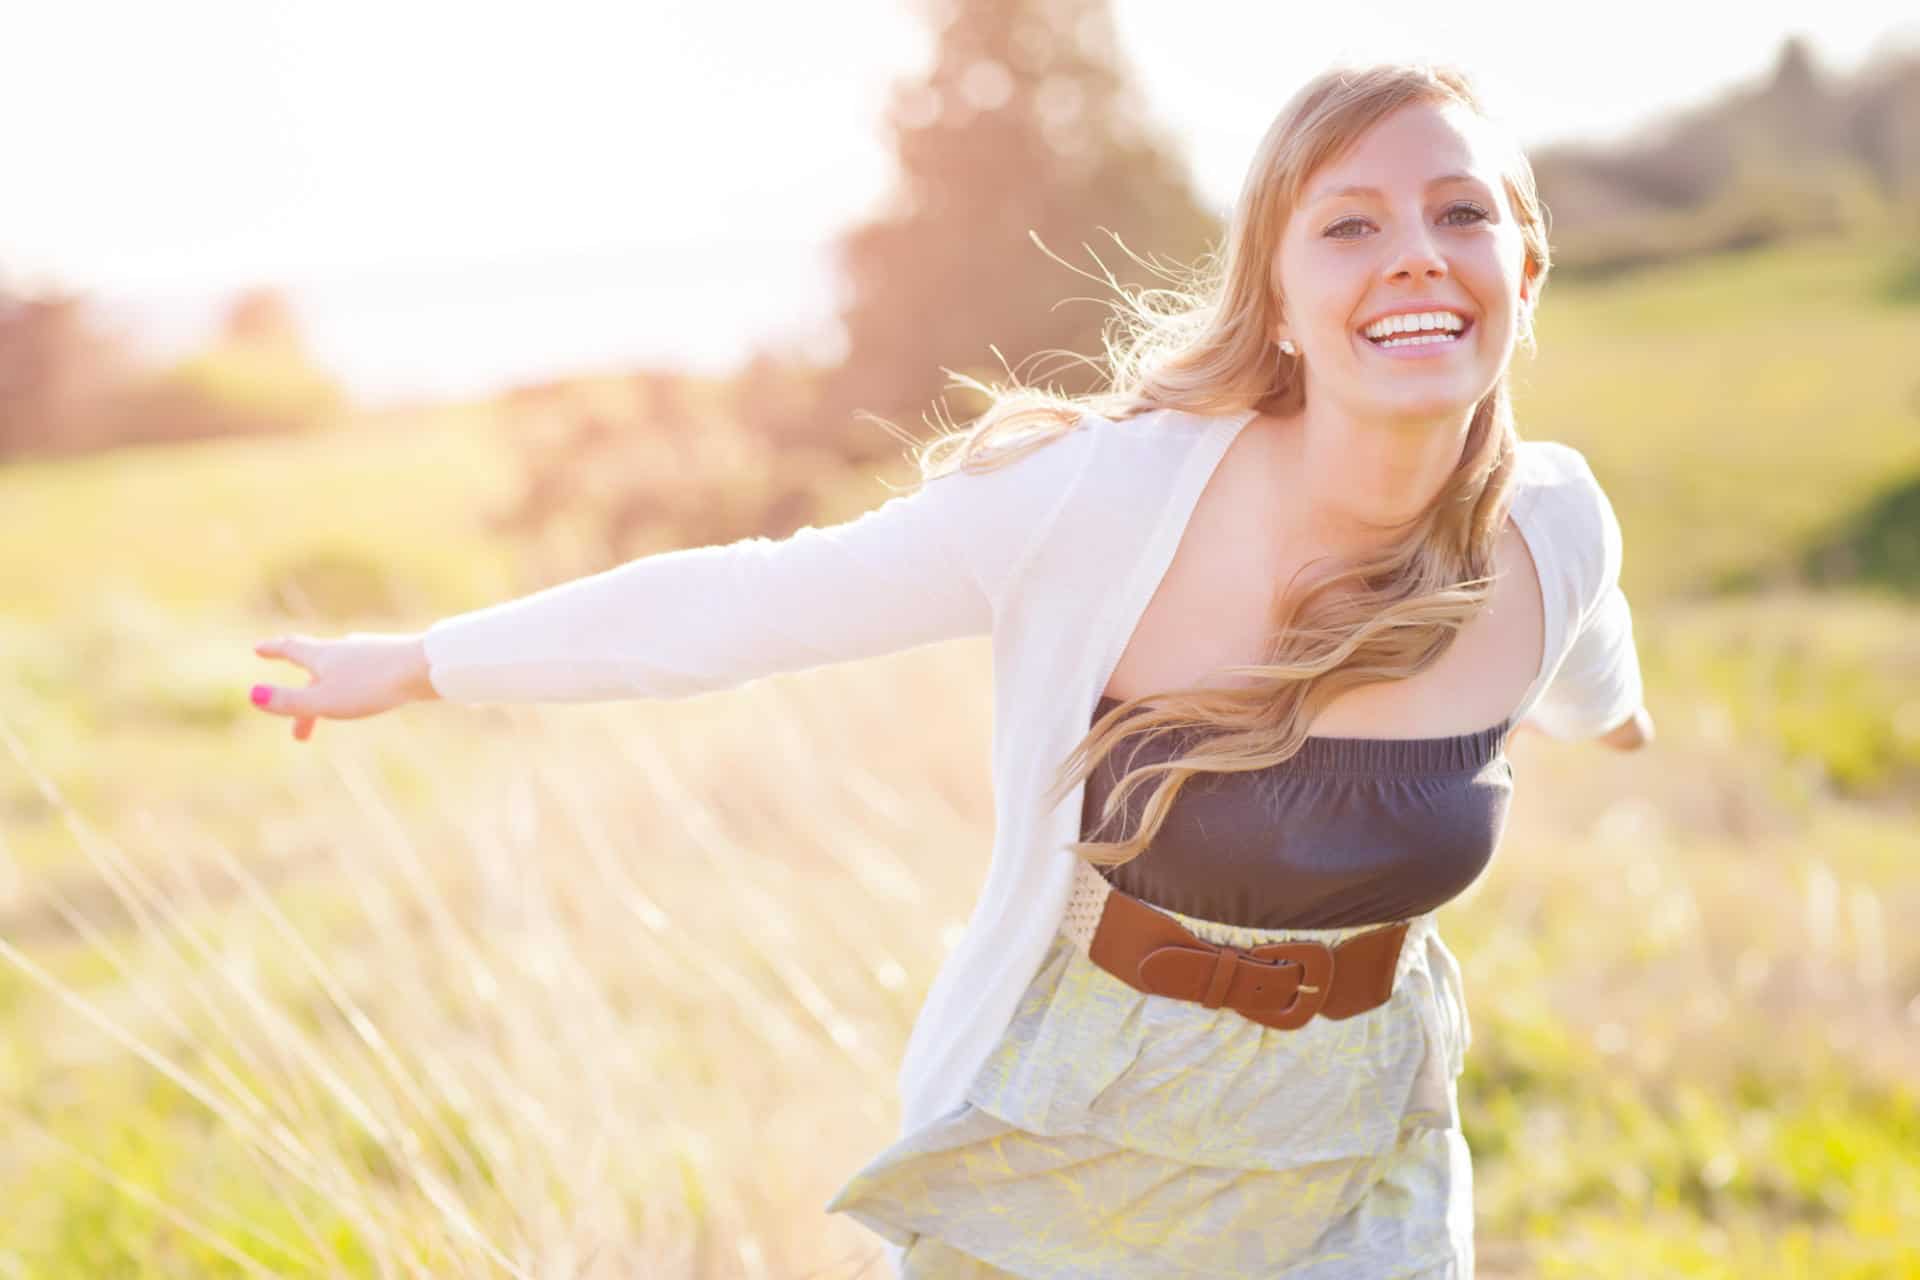 Girl smiling and waving arms in field